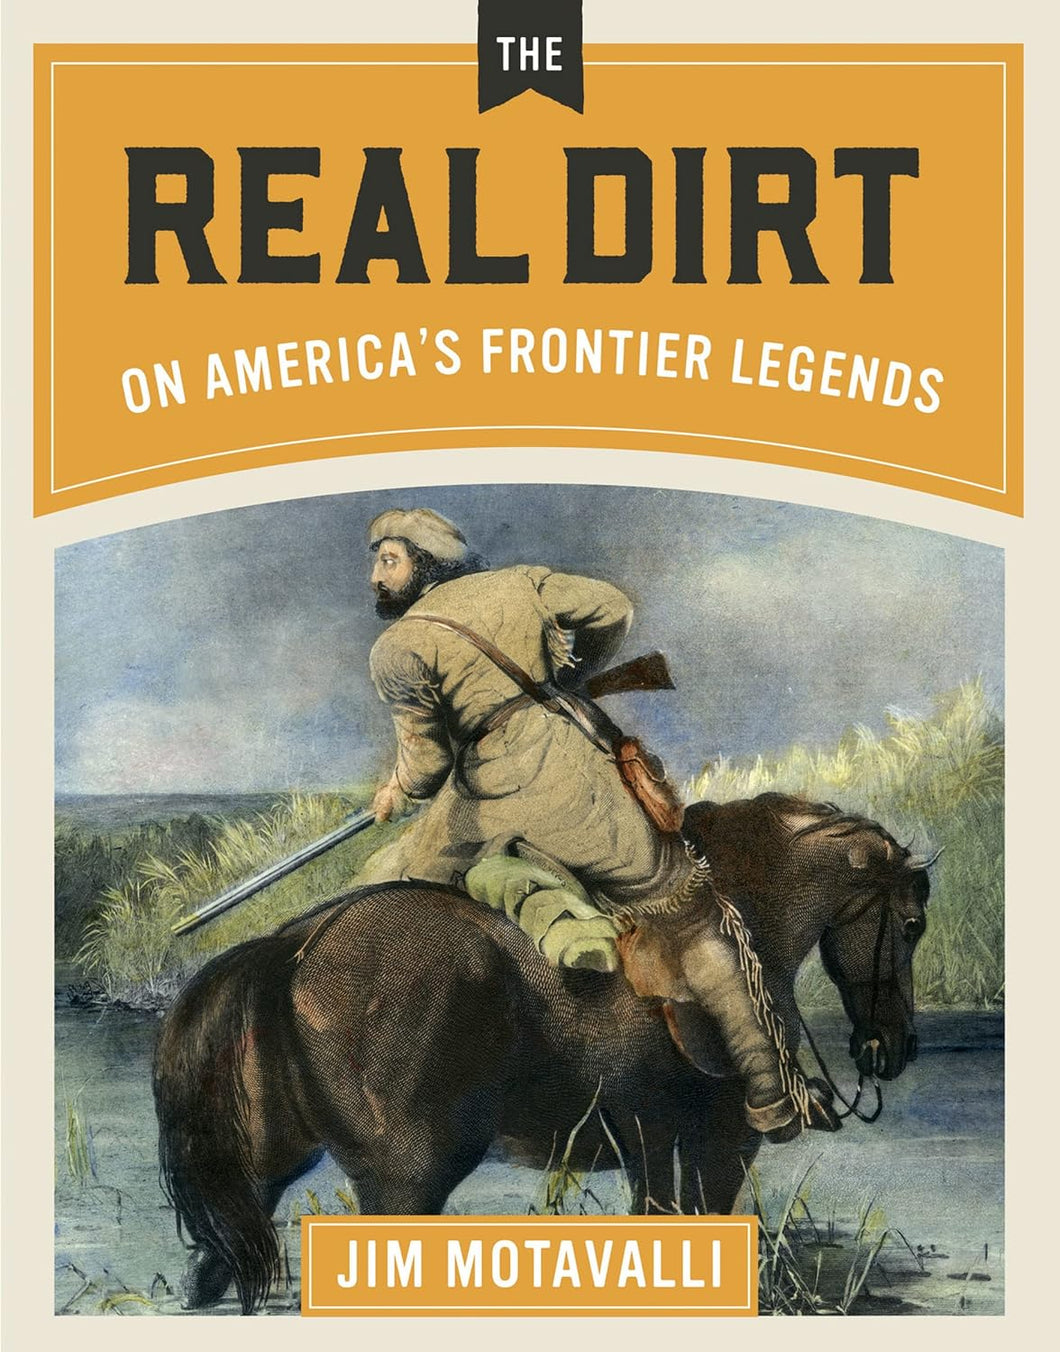 The Real Dirt On America's Frontier Legends by Jim Motavalli